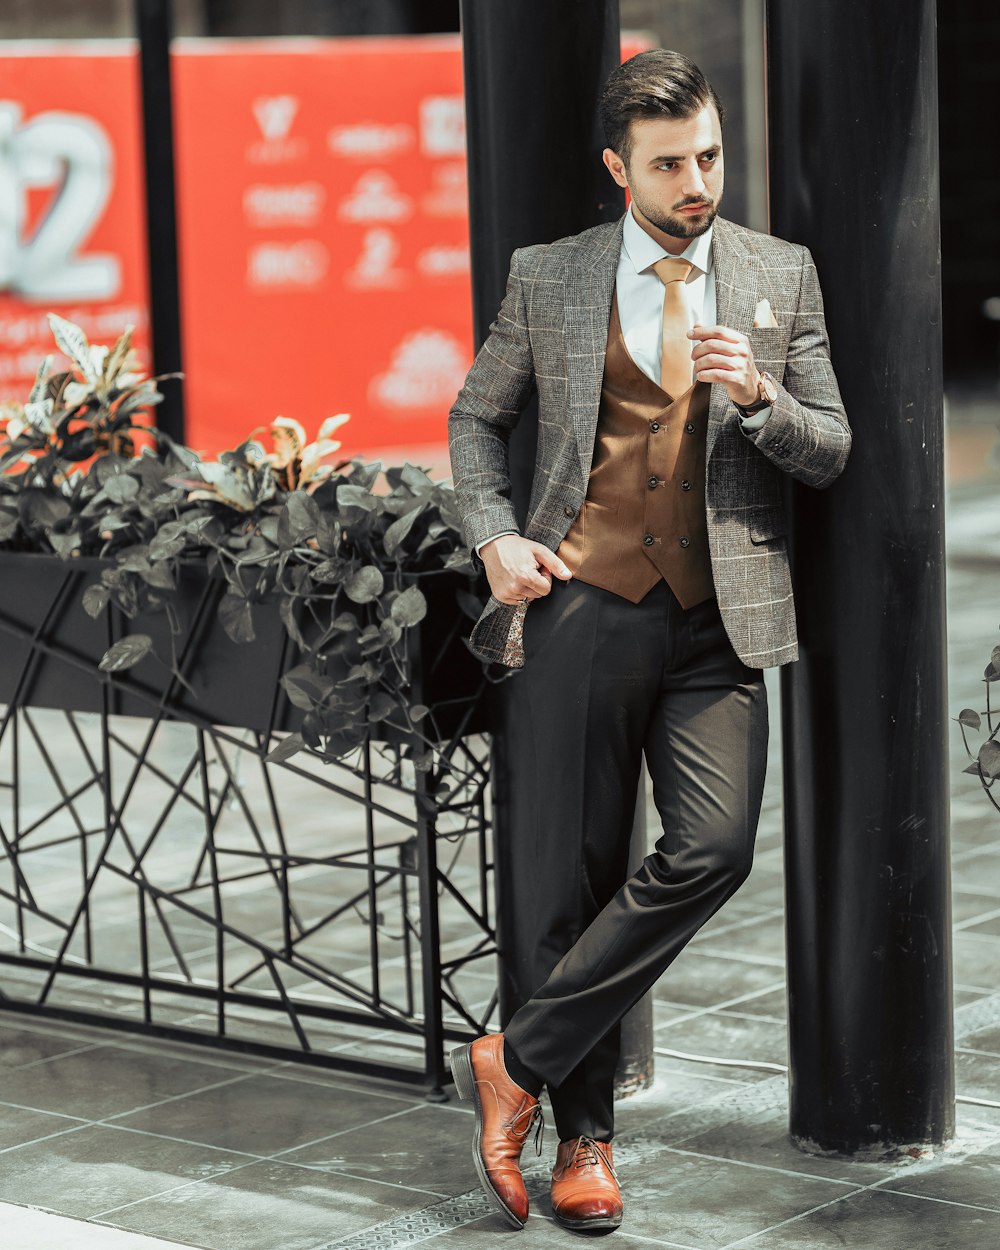 Premium Photo  Fashion young man in black suit and red pants